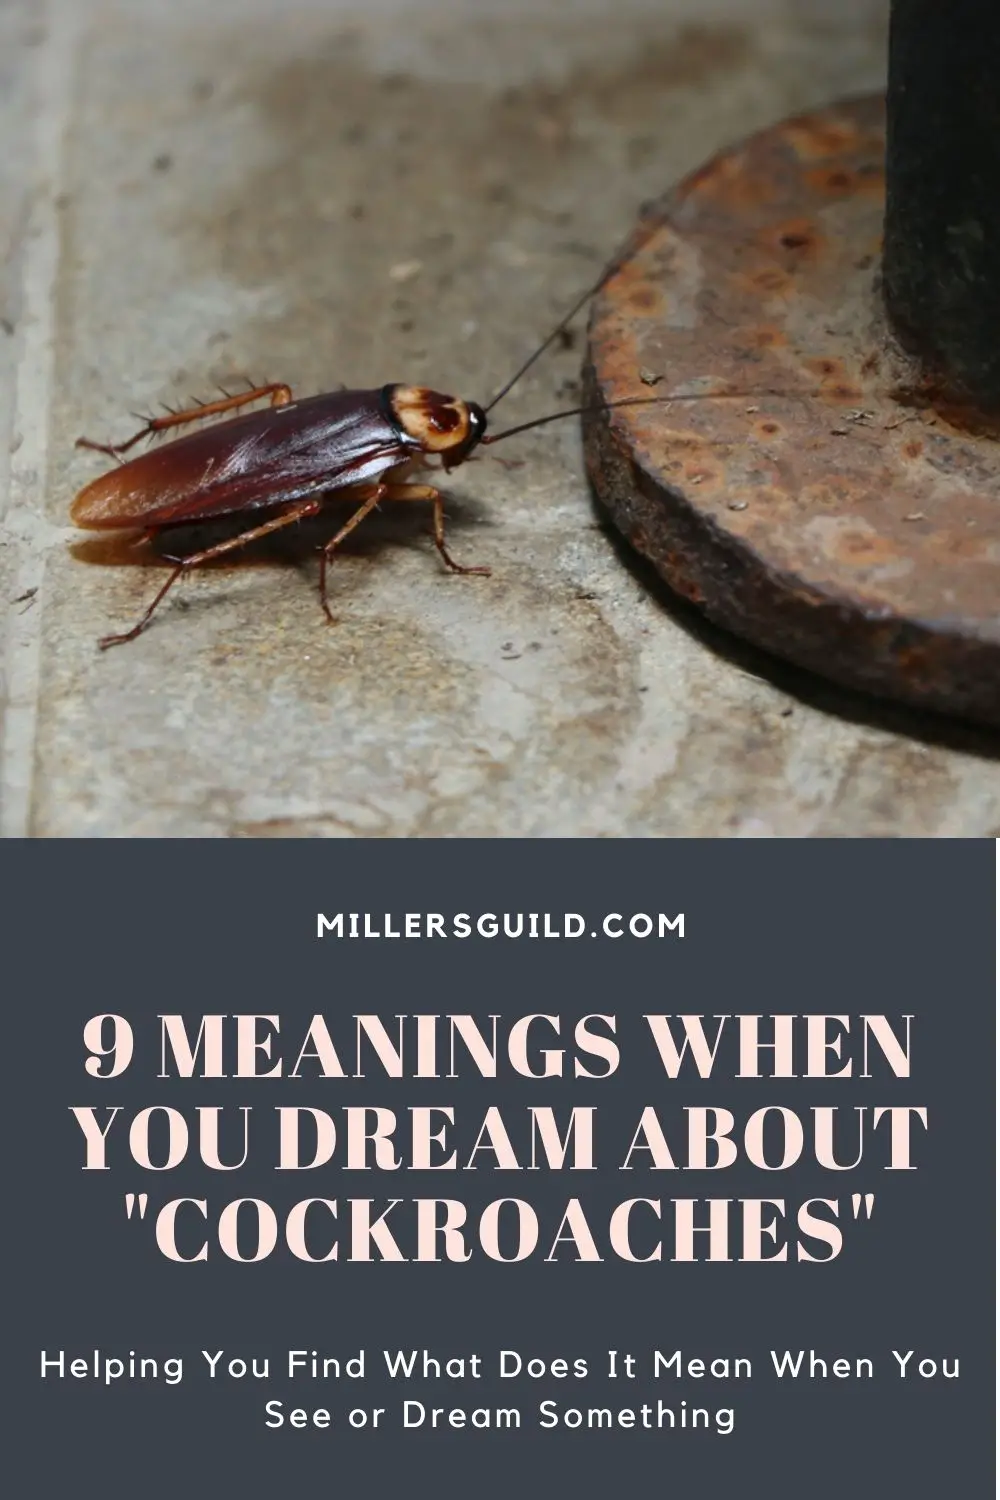 Cockroach Dream Meaning